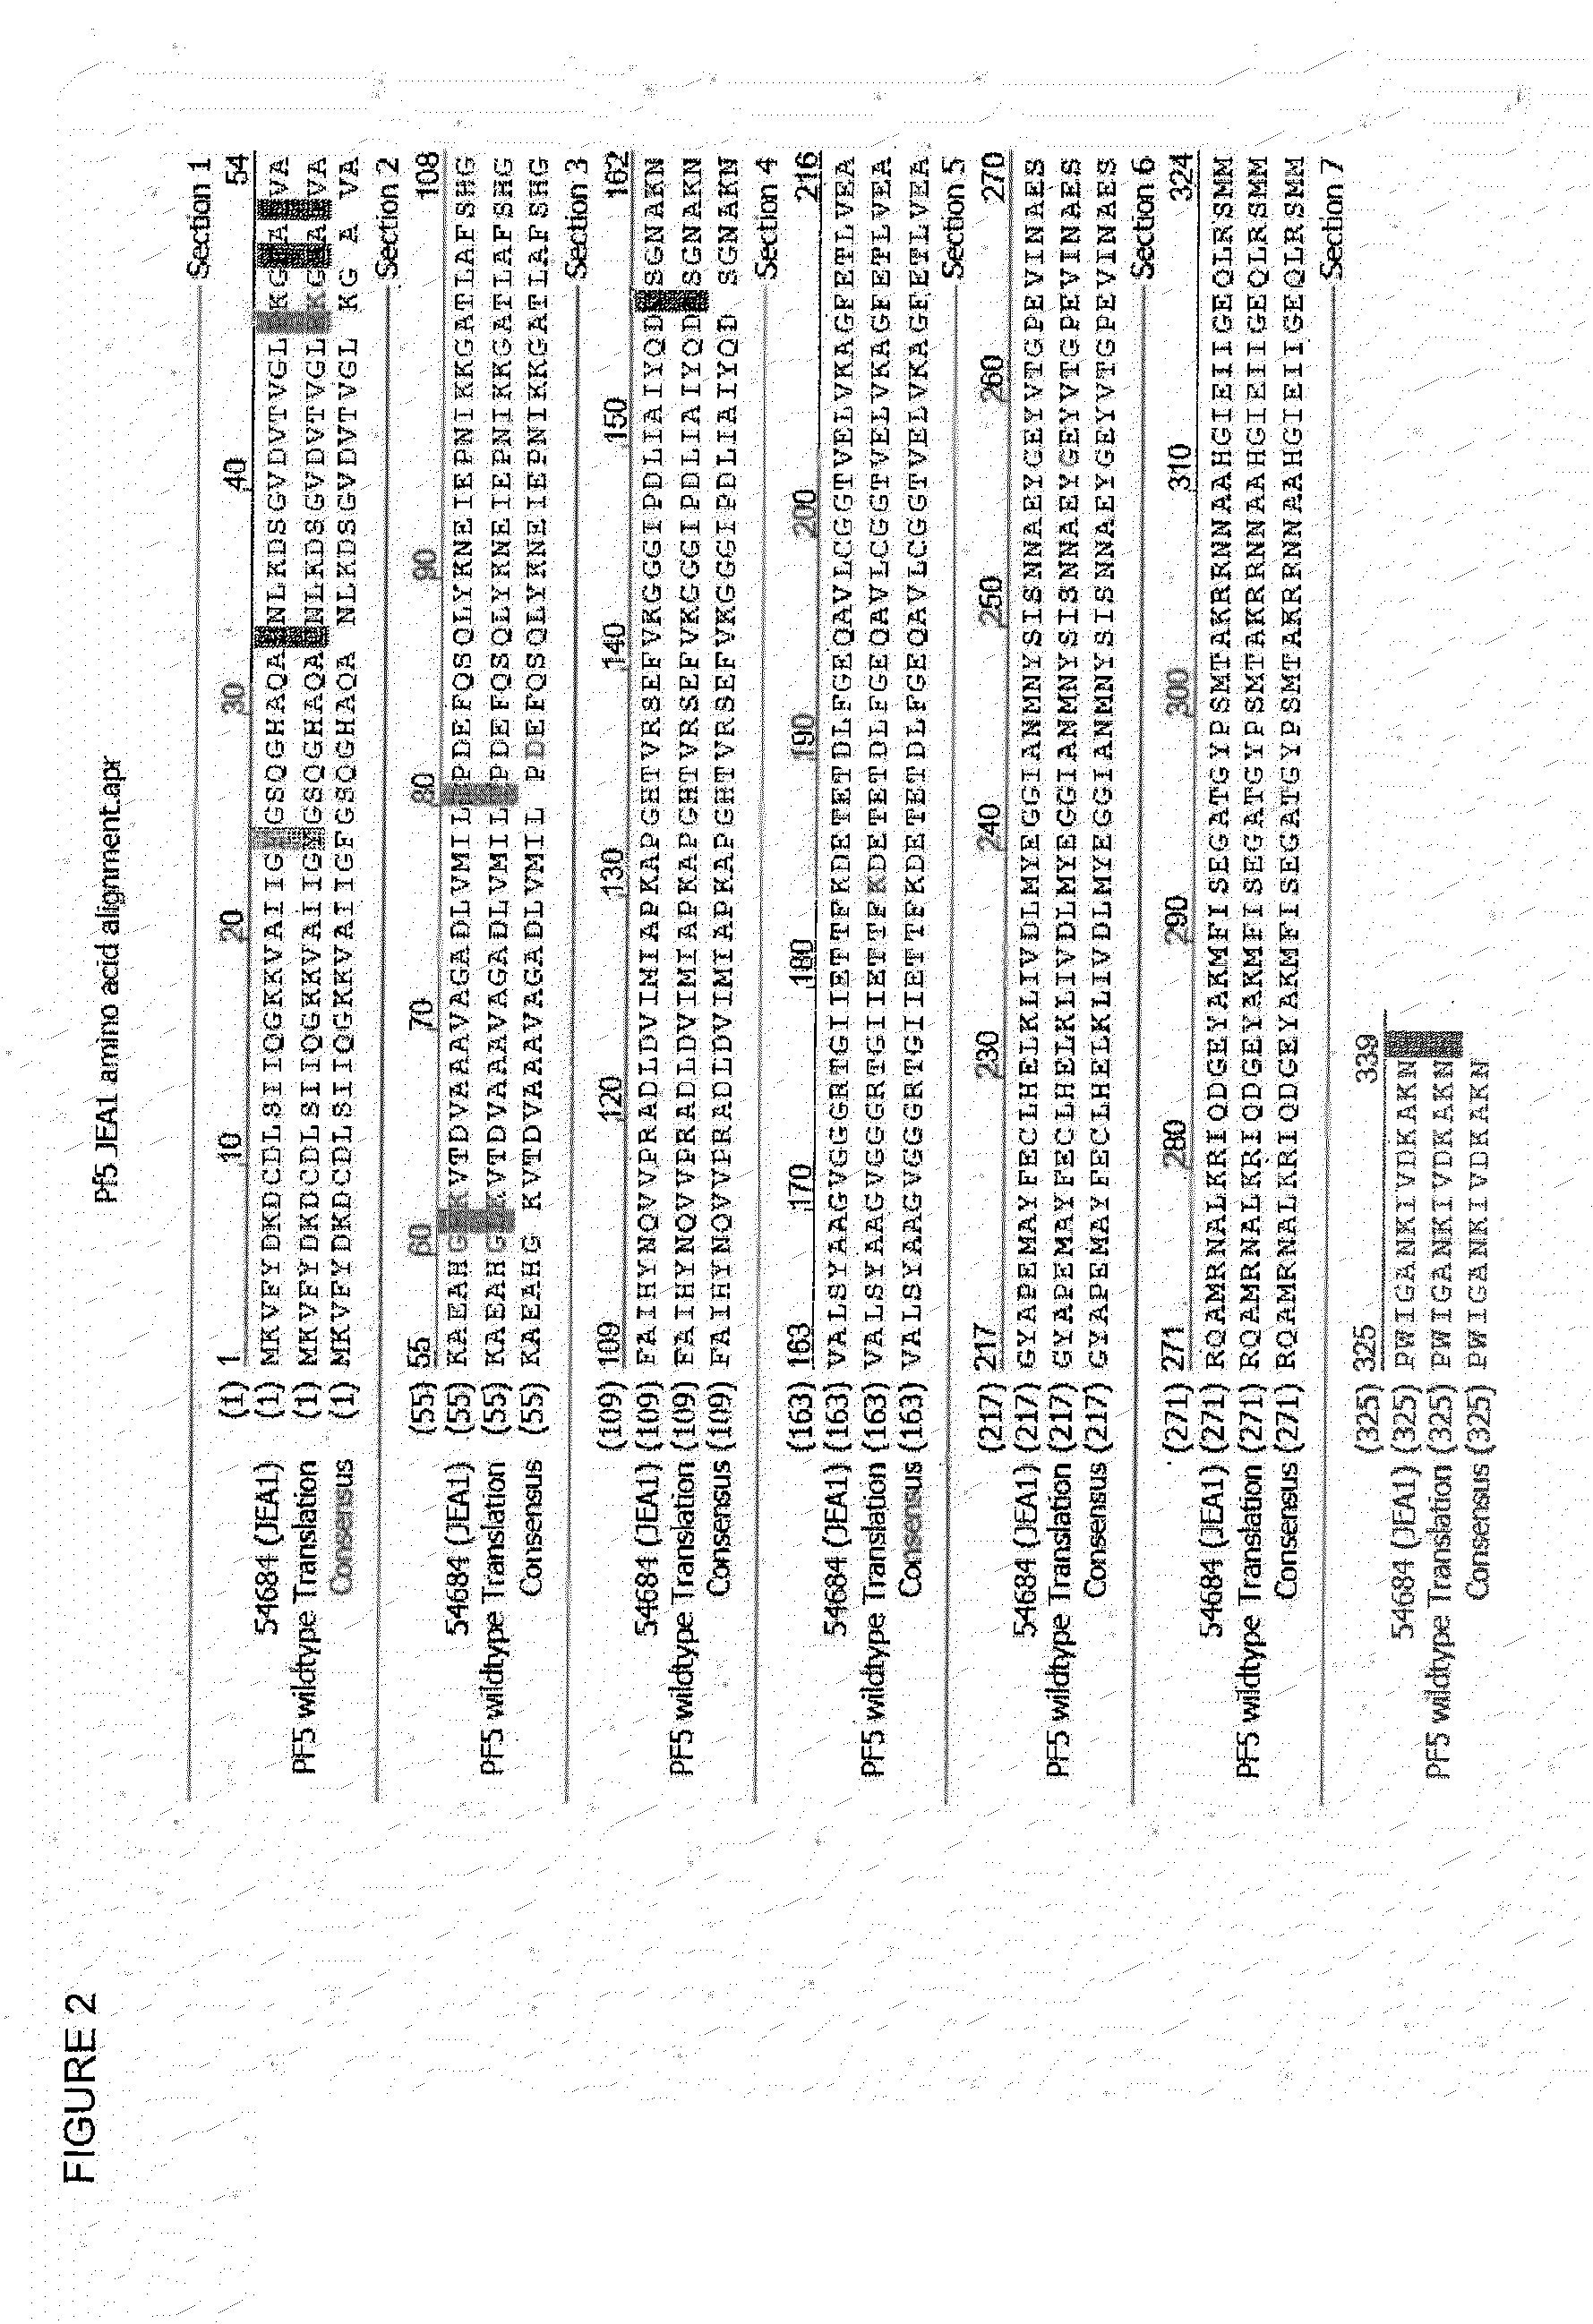 Ketol-acid reductoisomerase enzymes and methods of use